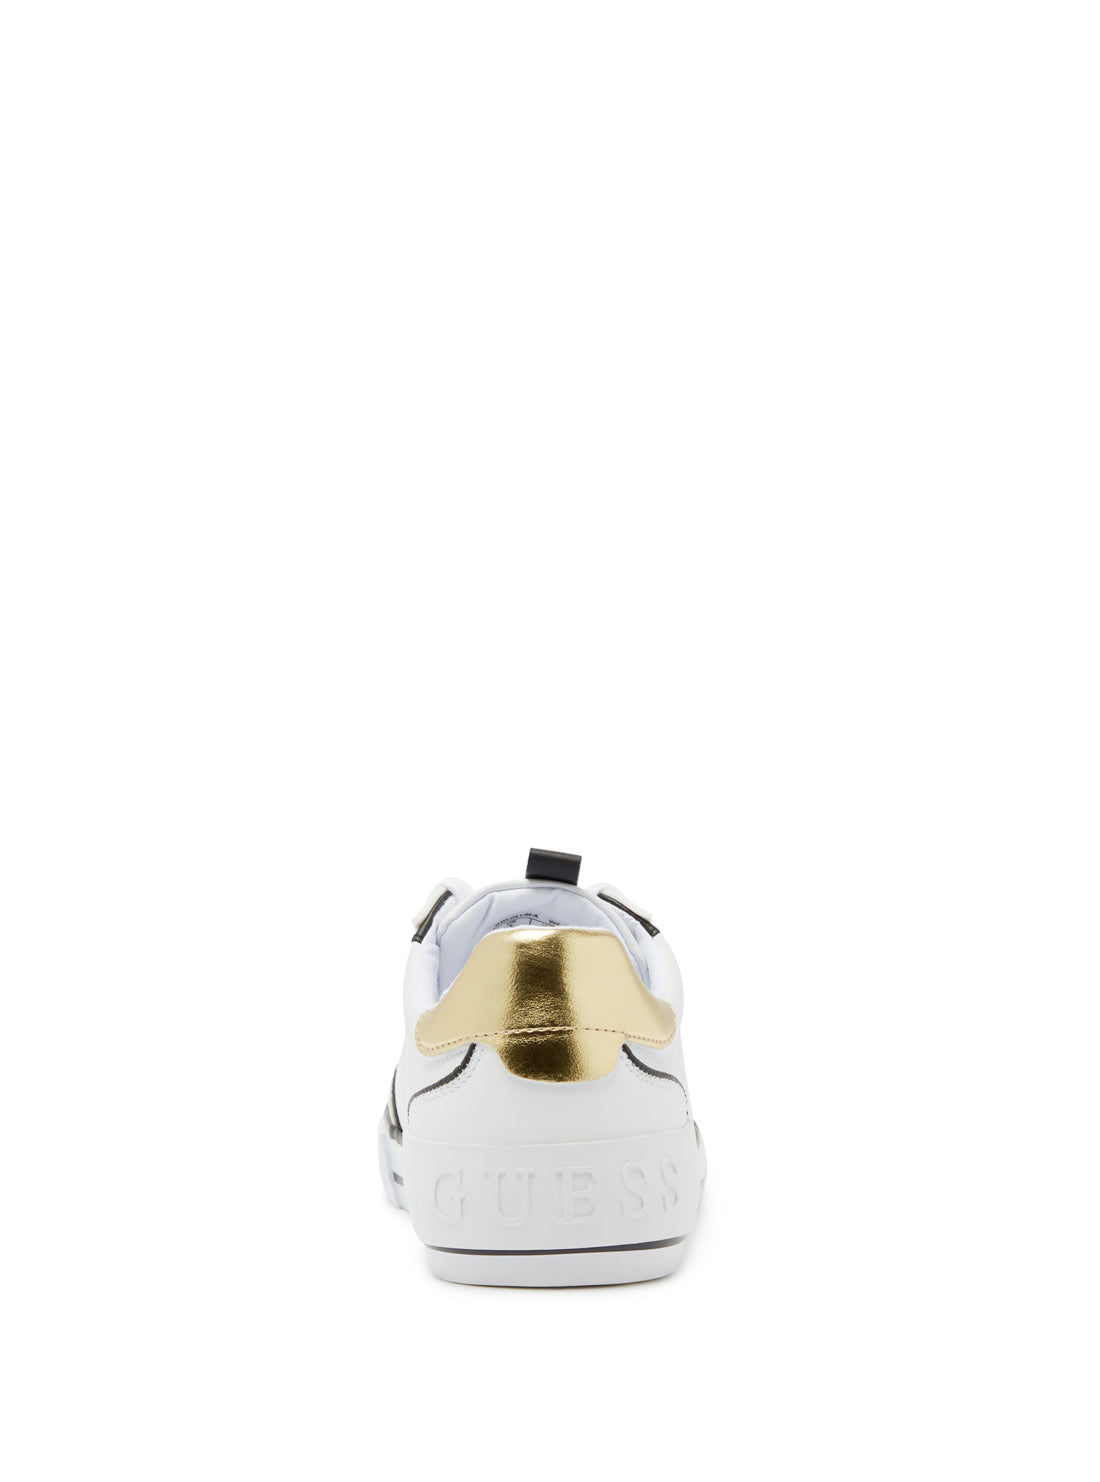 GUESS Women's White Gold Lollin Low Top Sneakers LOLLIN-A WHI03 Back View